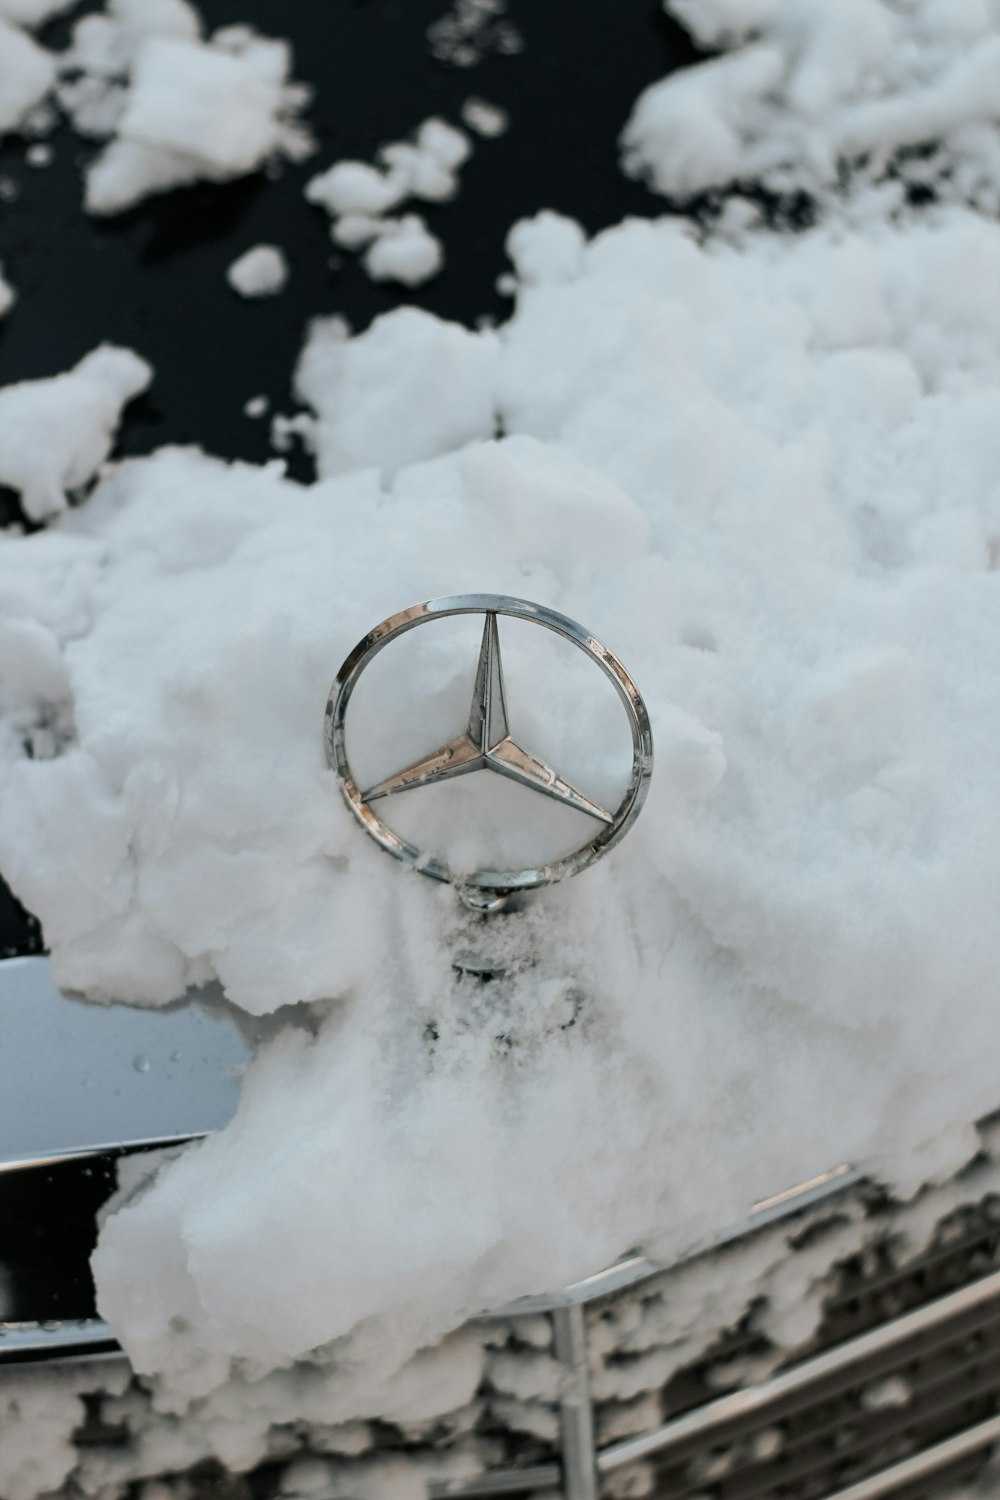 a mercedes emblem is covered in snow and ice